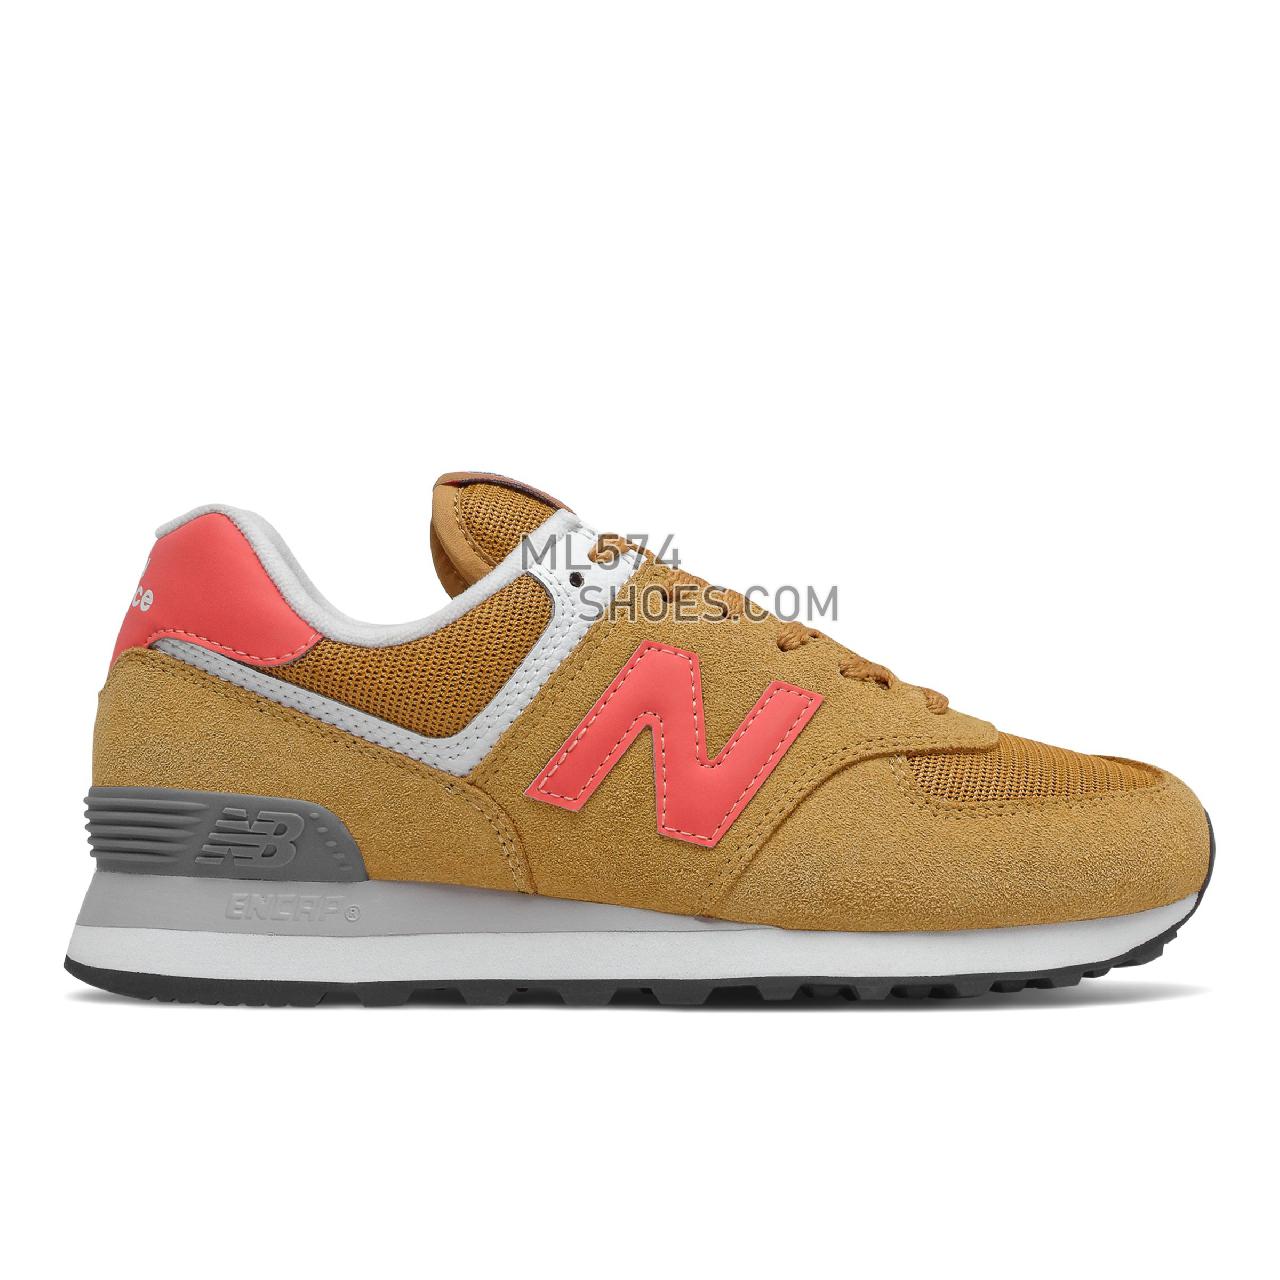 New Balance 574 - Women's Classic Sneakers - Workwear with Red - WL574HA2